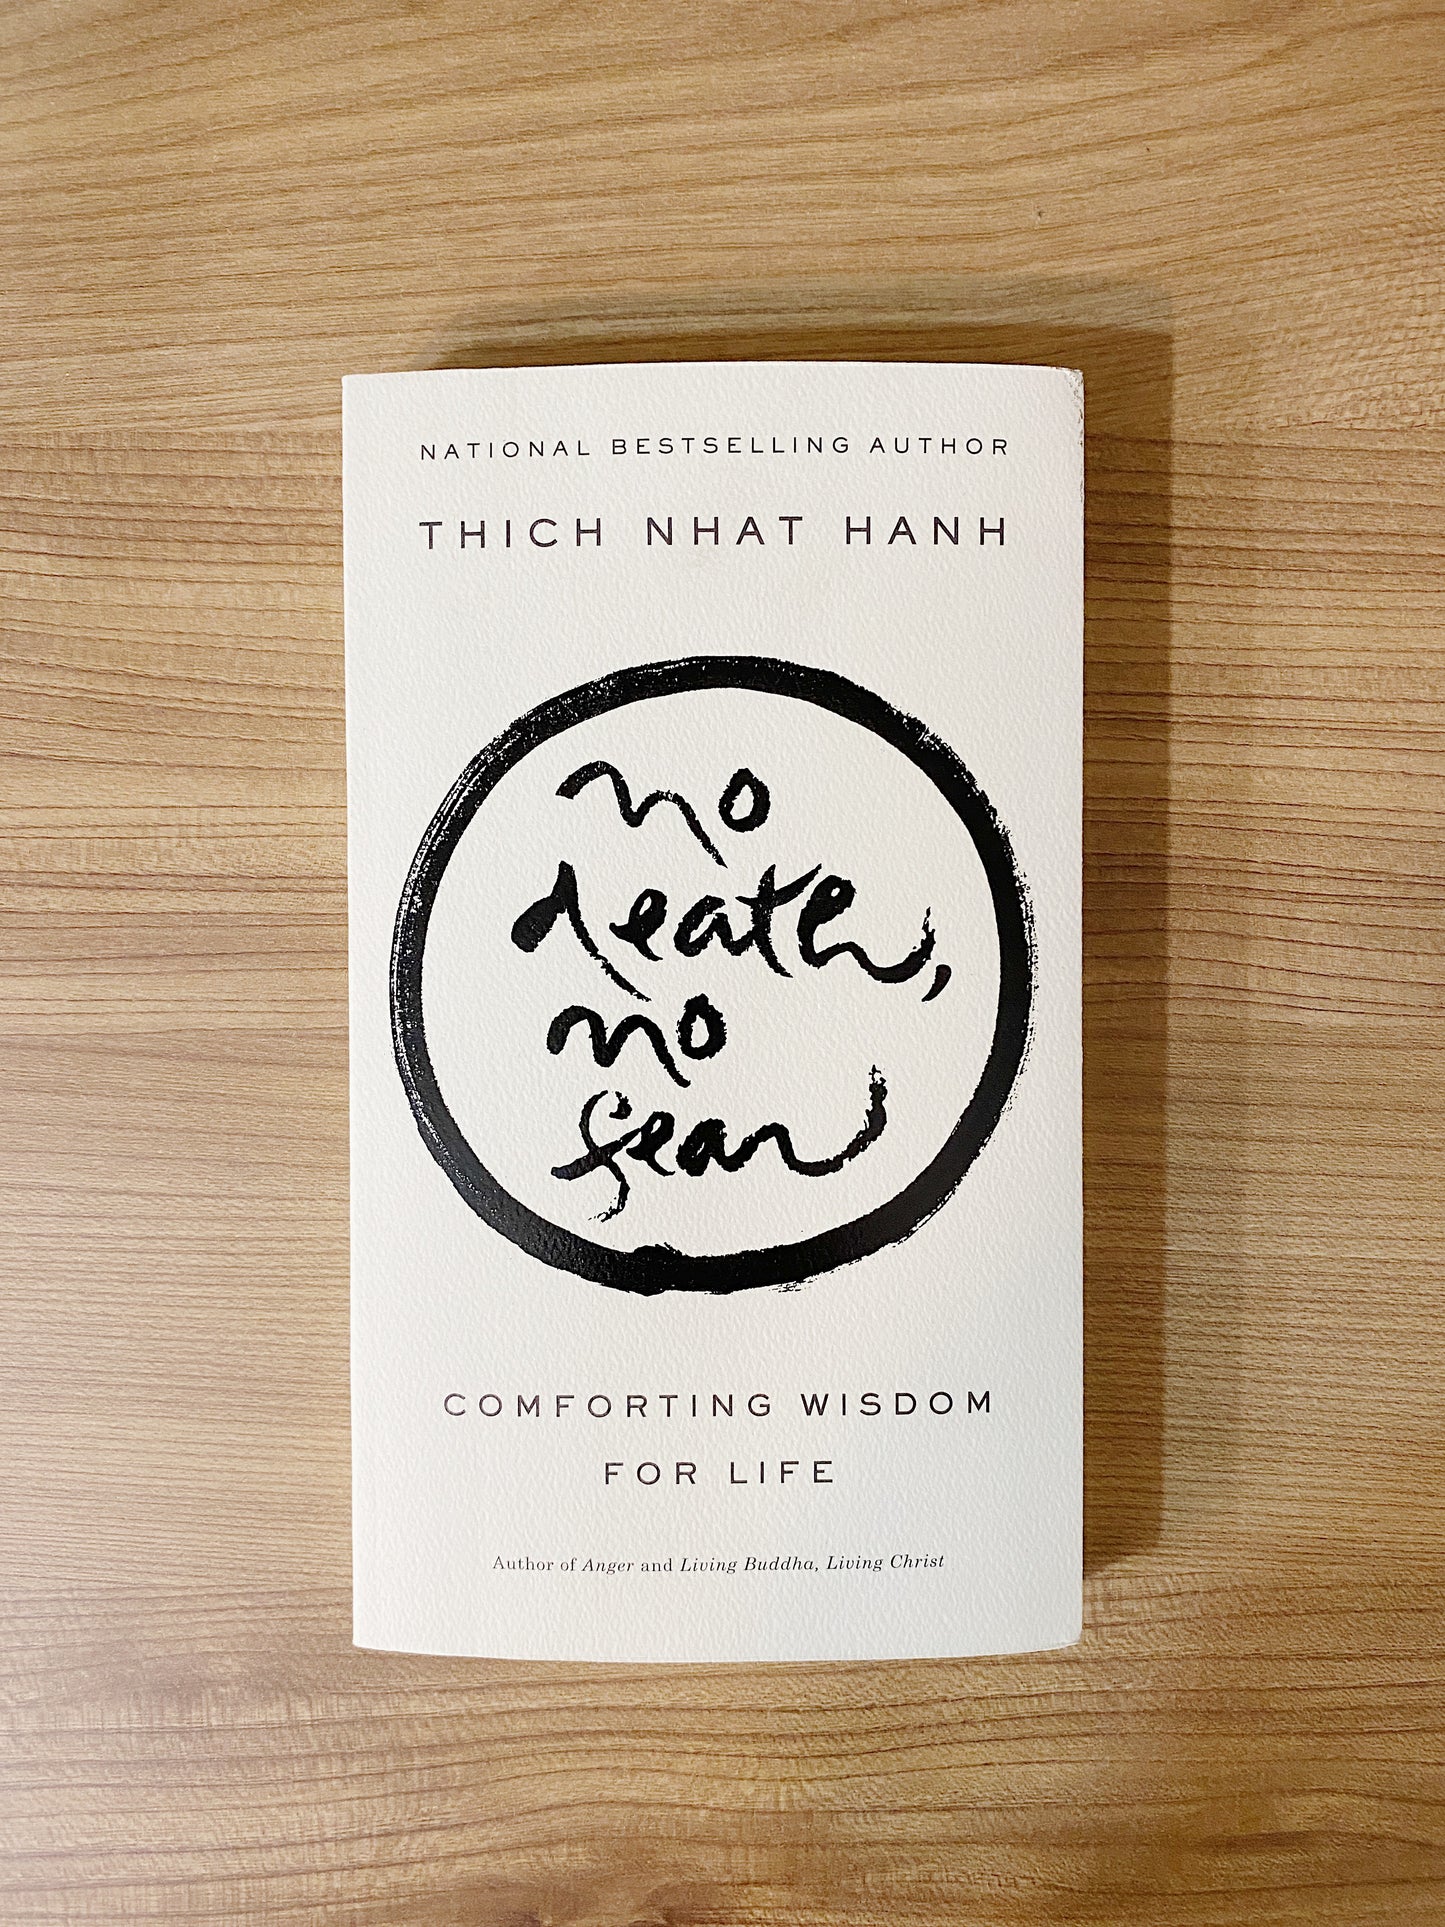 Thich Nhat Hanh - No Death, No Fear: Comforting Wisdom for Life